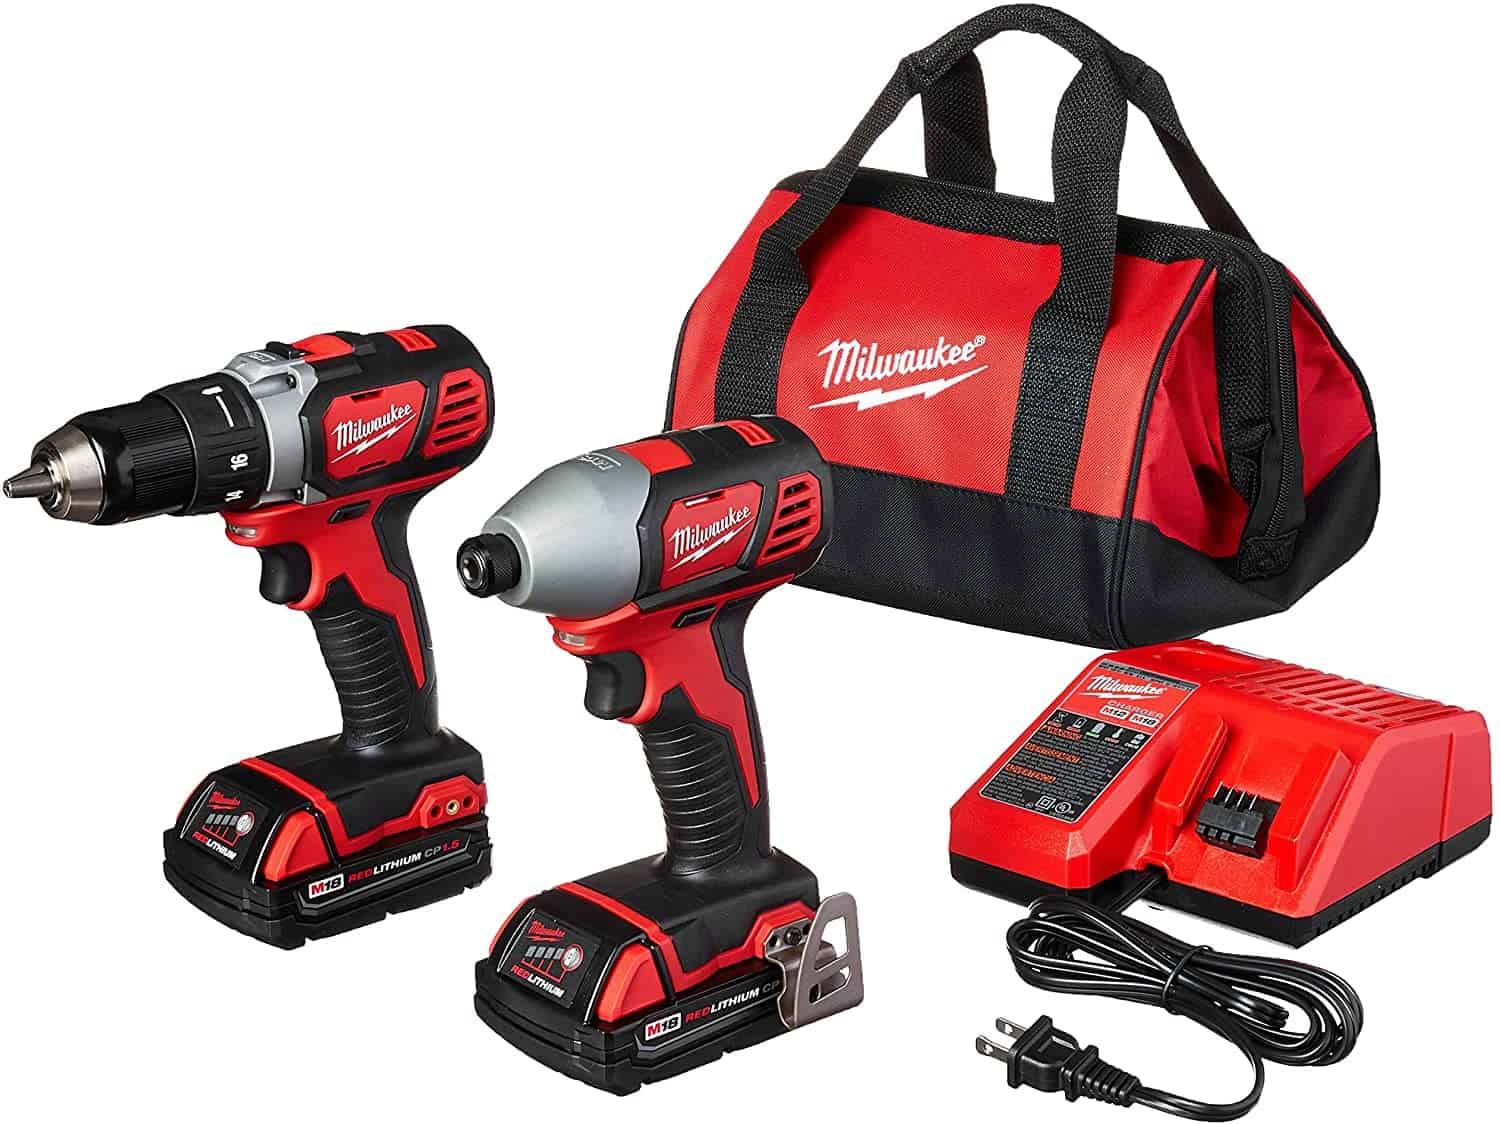 MILWAUKEE'S 2691-22 18-Volt Compact Drill and Impact Driver